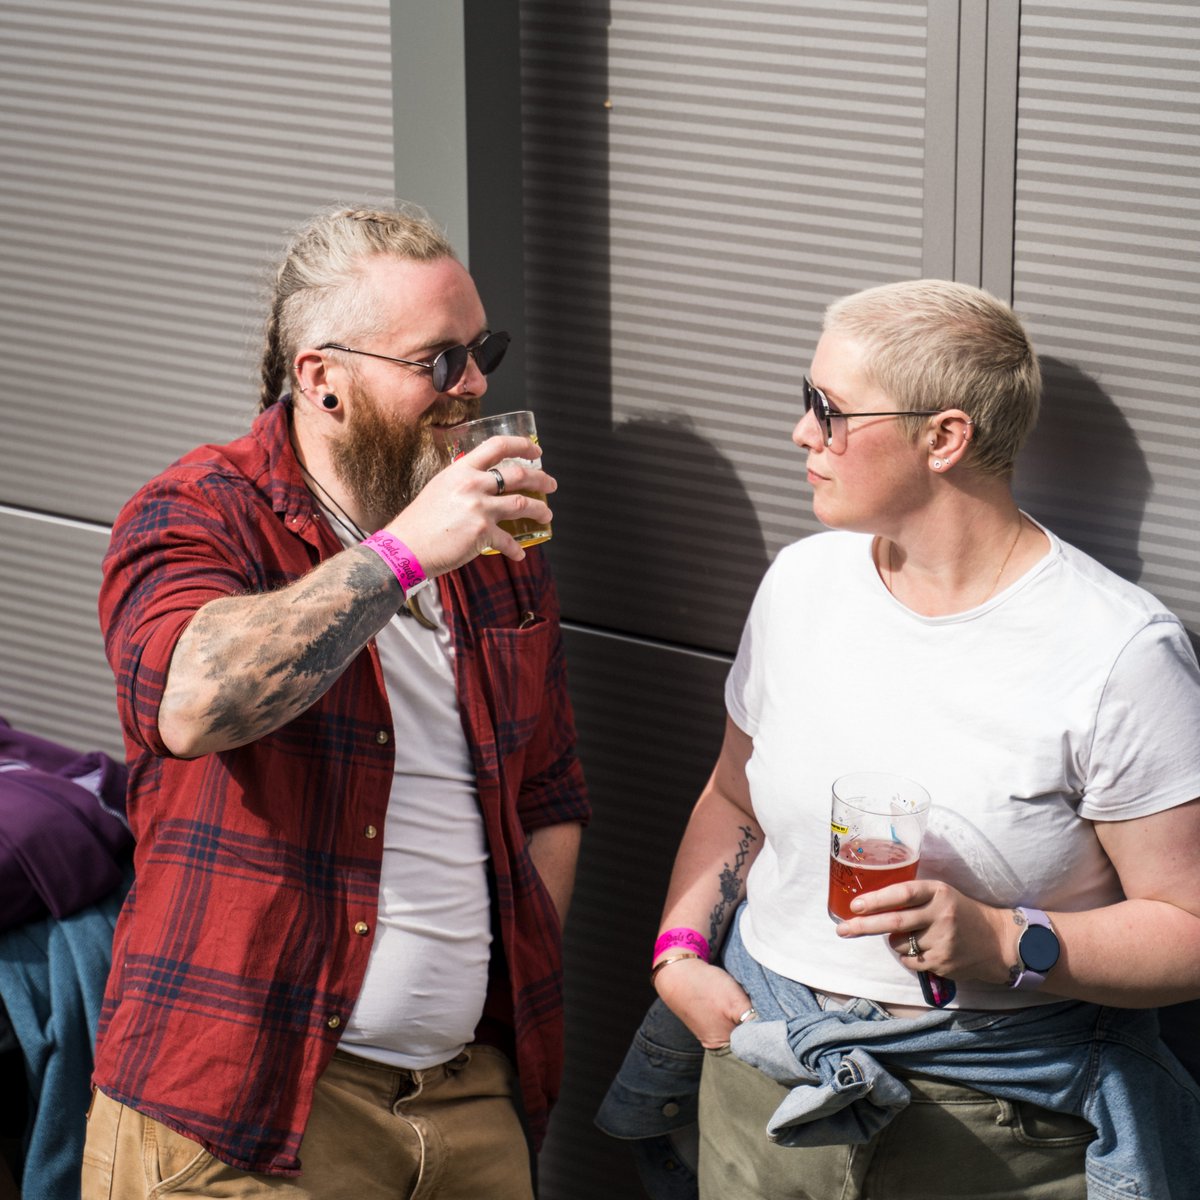 Currently basking in the sun with your pals? ☀️ Picture this vibe, but even better at Suds With Buds on June 29th! 🍻 While you're enjoying the rays, check out our throwback gallery of photos from last year's event 📸 Get your tickets now at 👉 roosters.co.uk/products/suds-…